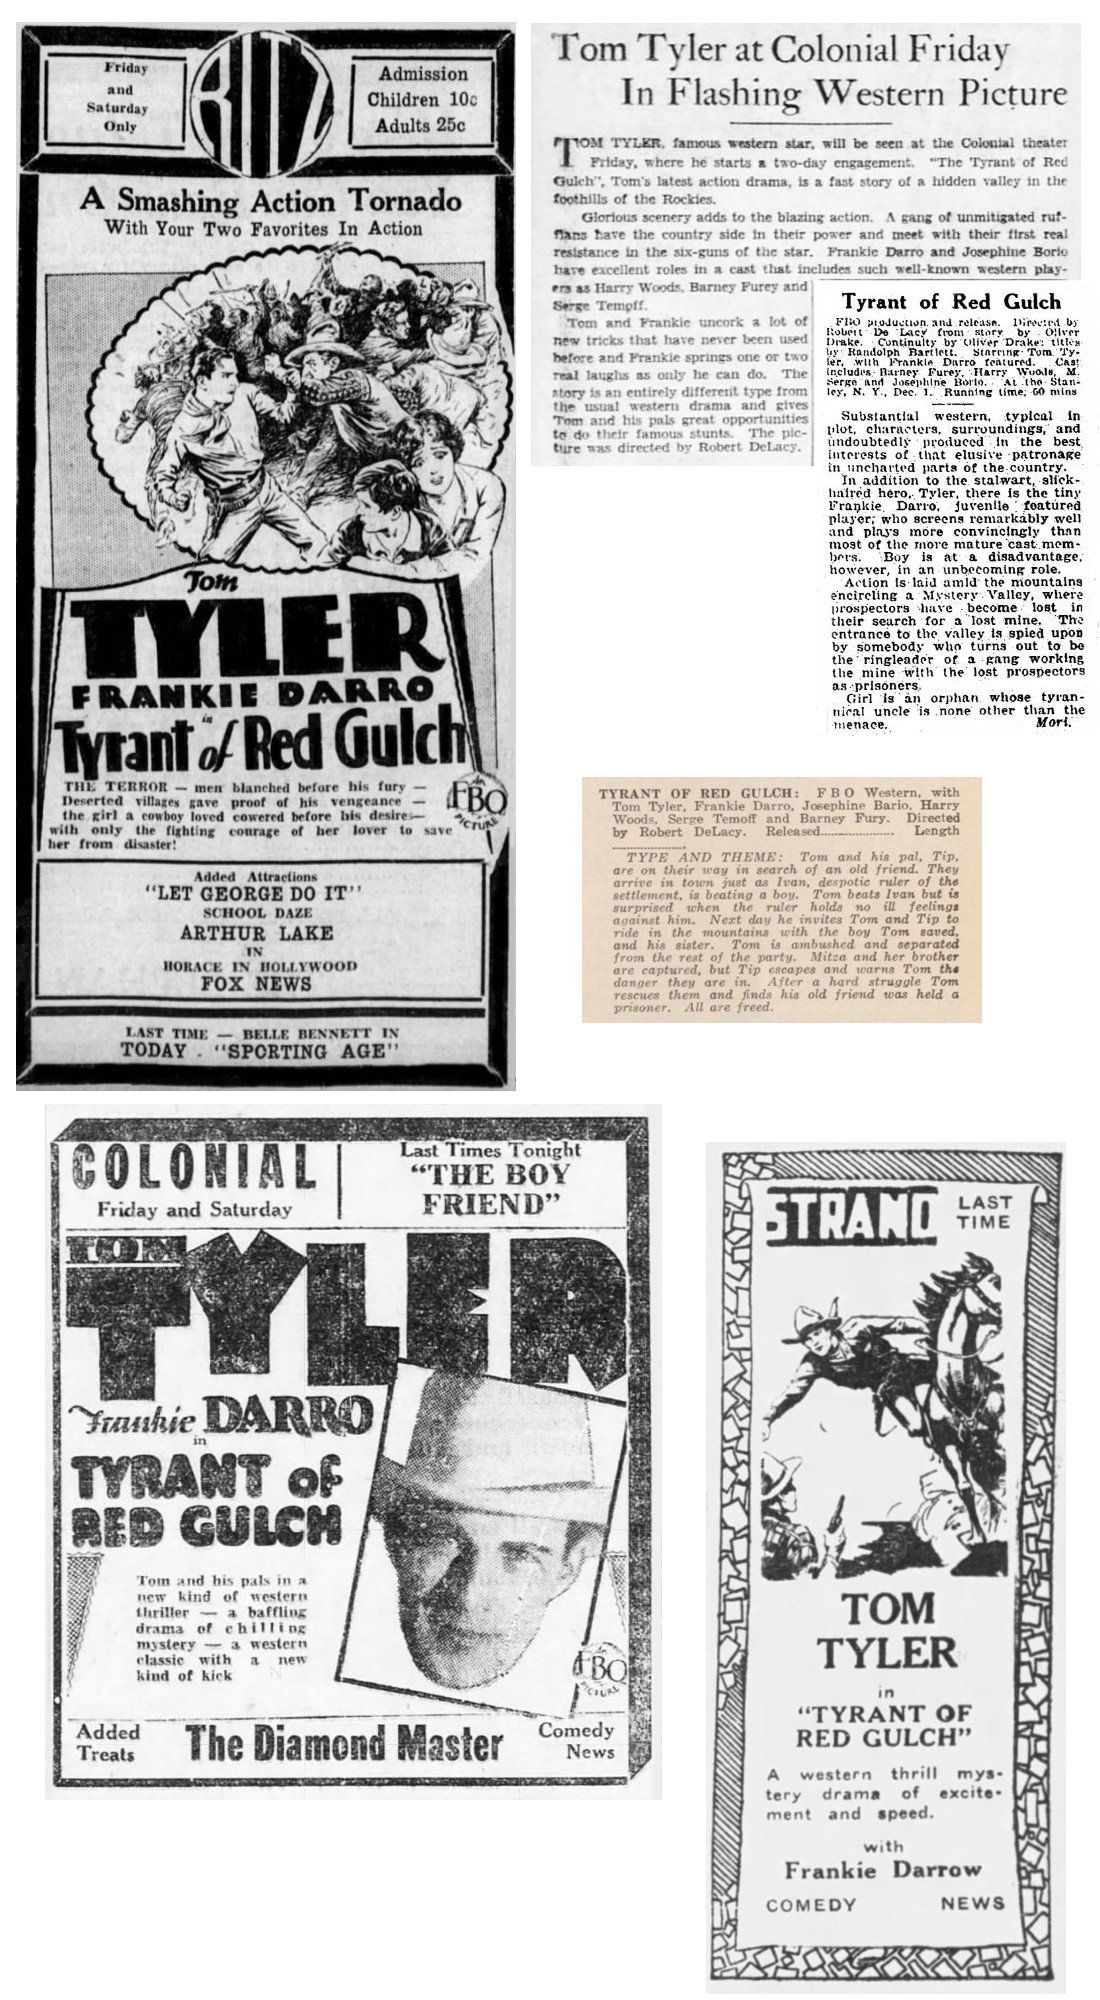 Tyrant of Red Gulch film reviews synopses cinema ads pictures of Tom